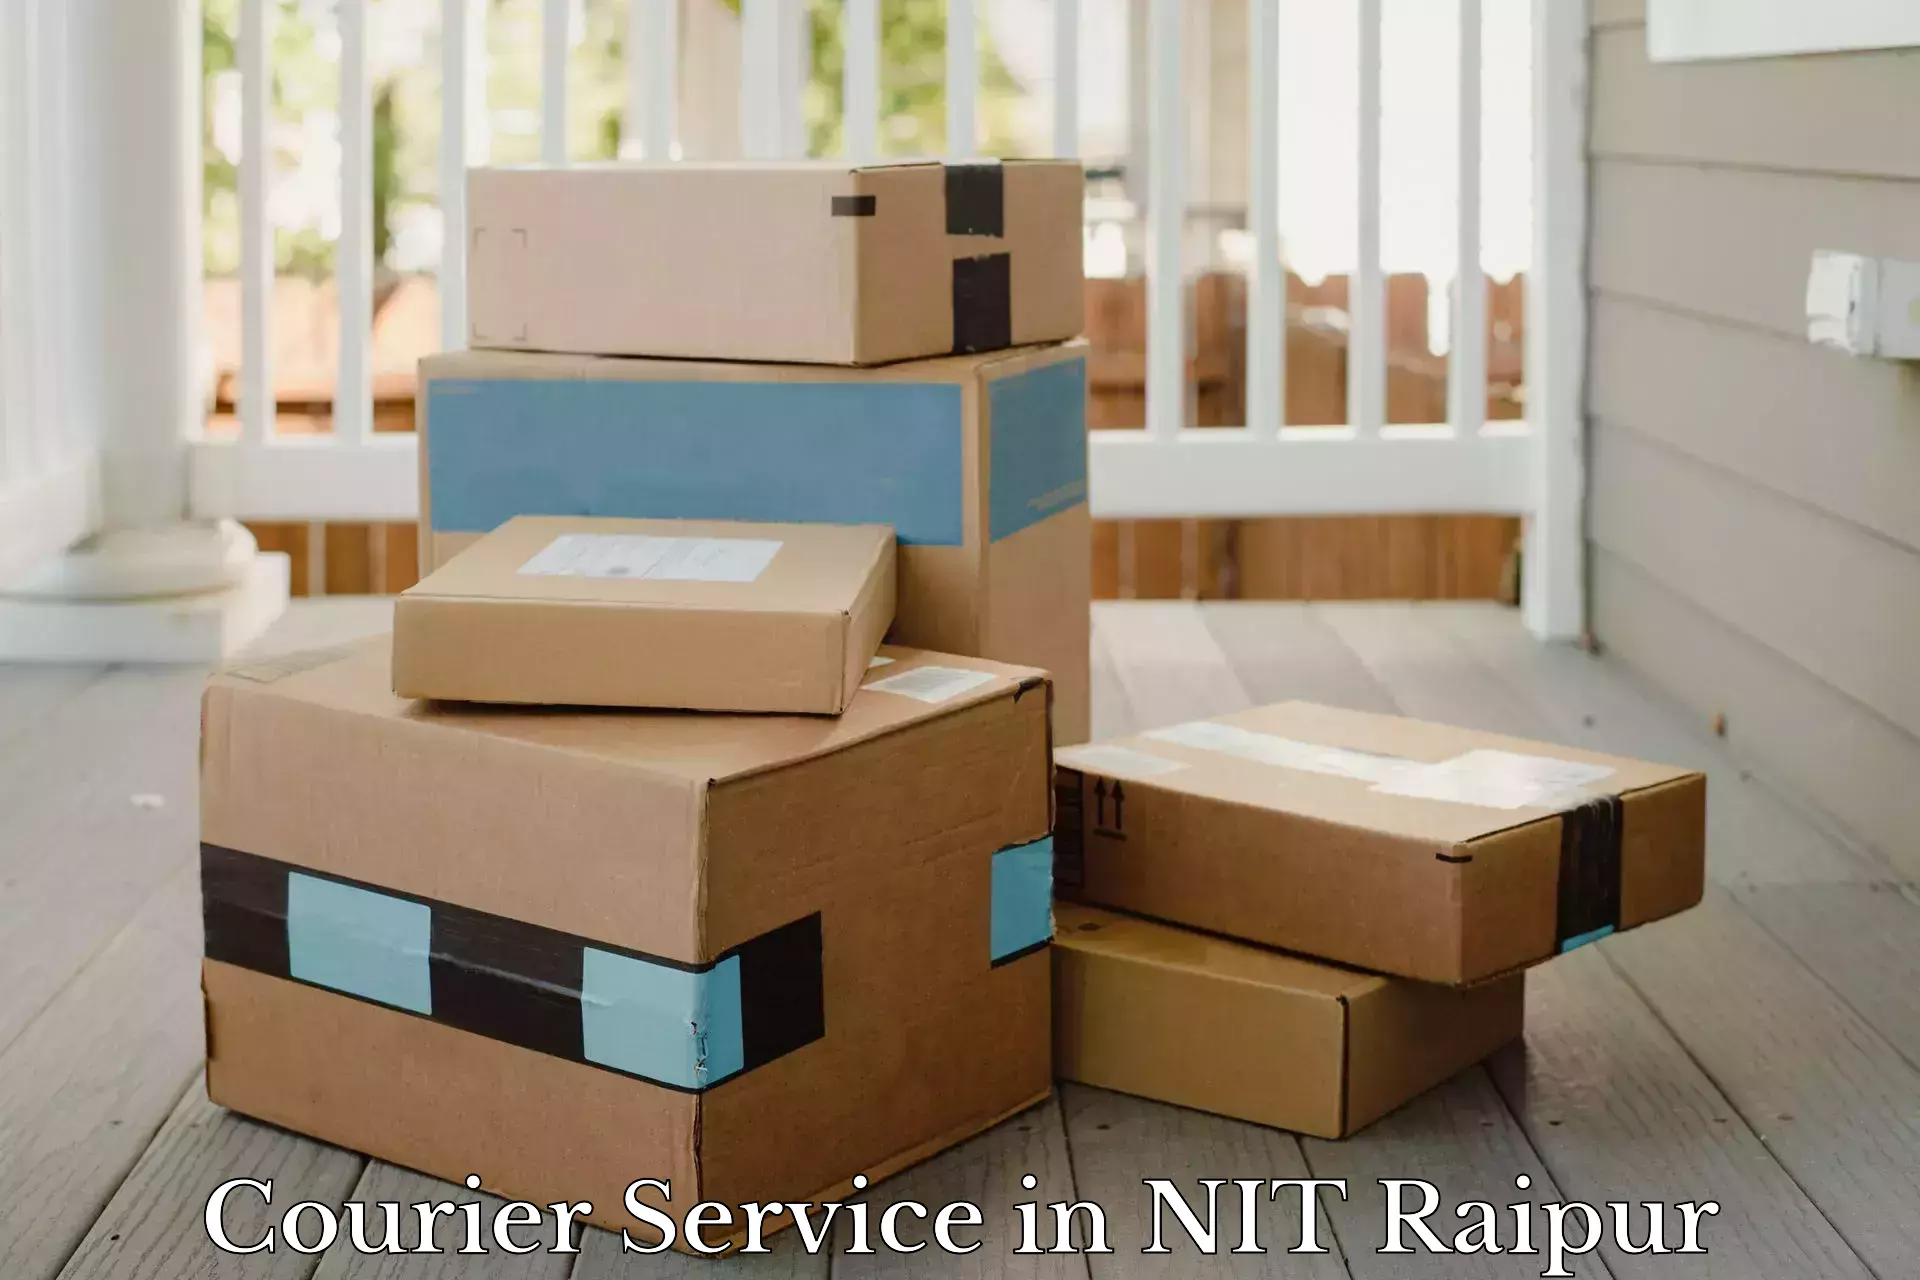 Courier service partnerships in NIT Raipur